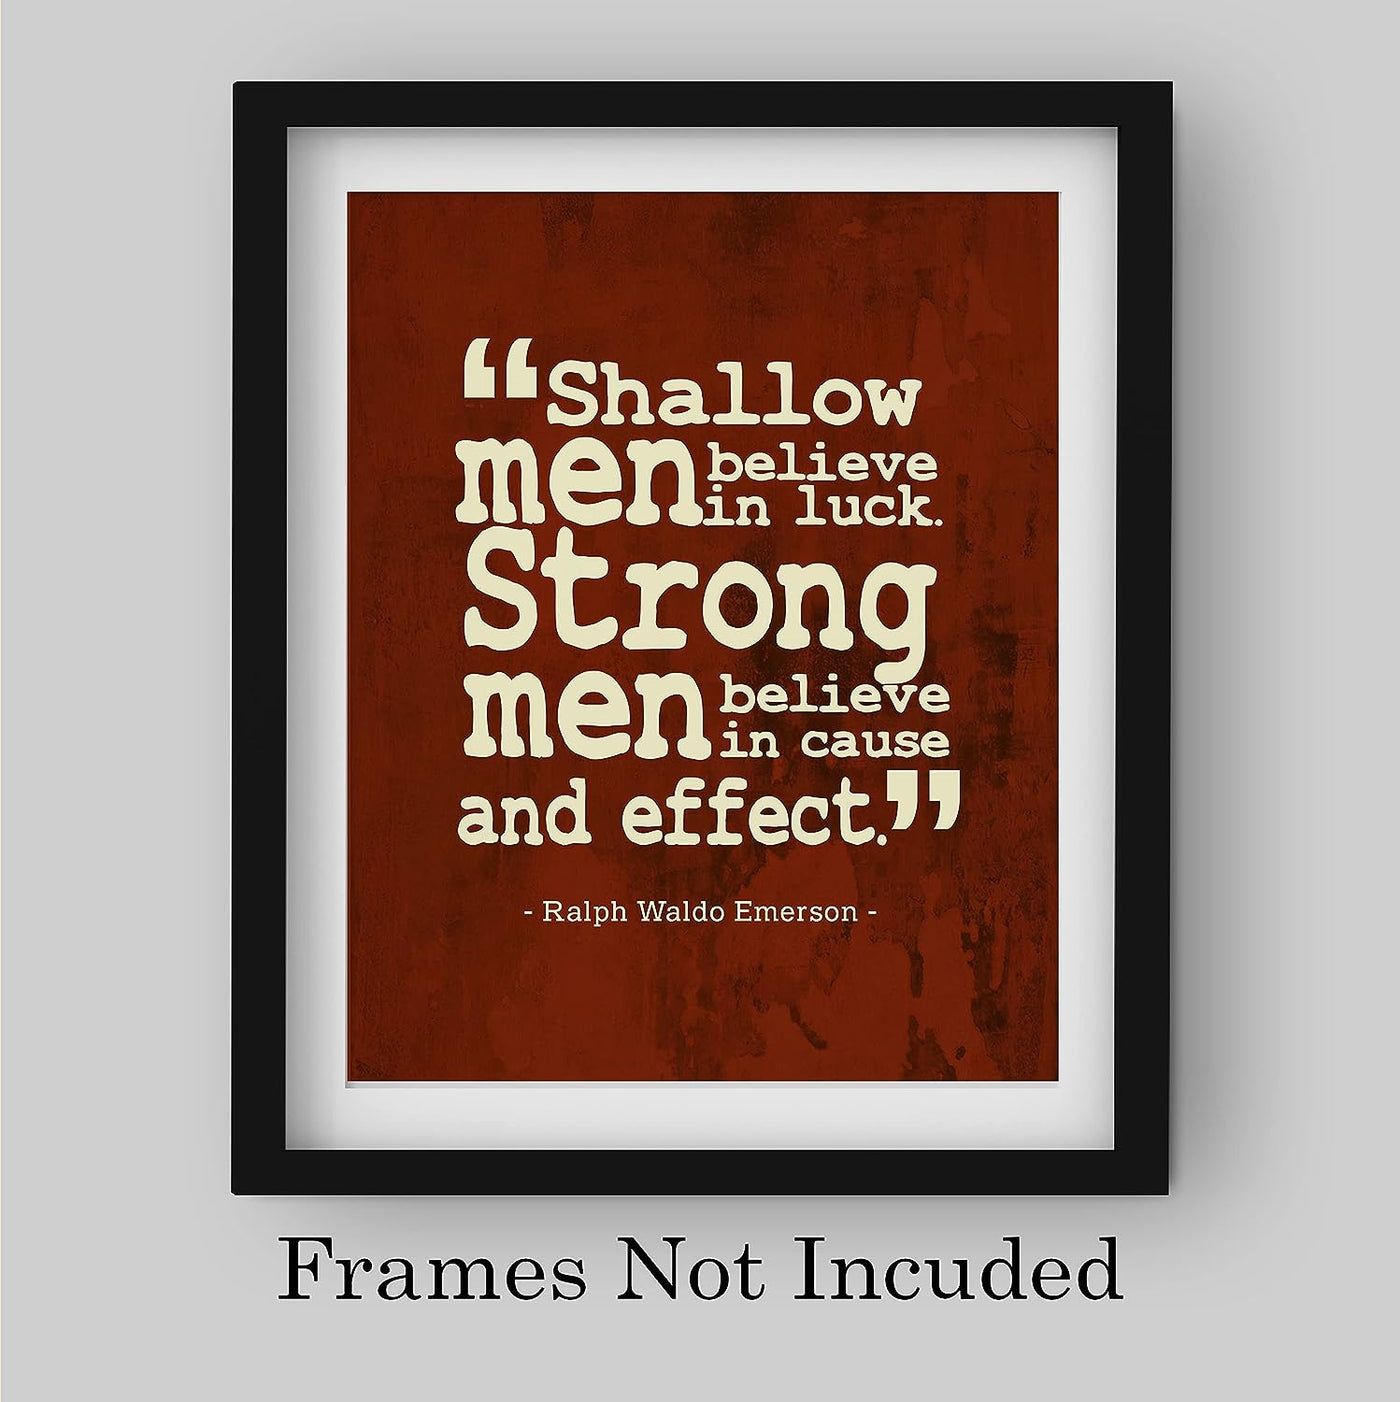 Ralph Waldo Emerson Quotes-"Shallow Men Believe in Luck"-Motivational Wall Art -8 x 10" Modern Typographic Wall Print-Ready to Frame. Inspirational Home-Office-Classroom Decor. Great for Motivation!